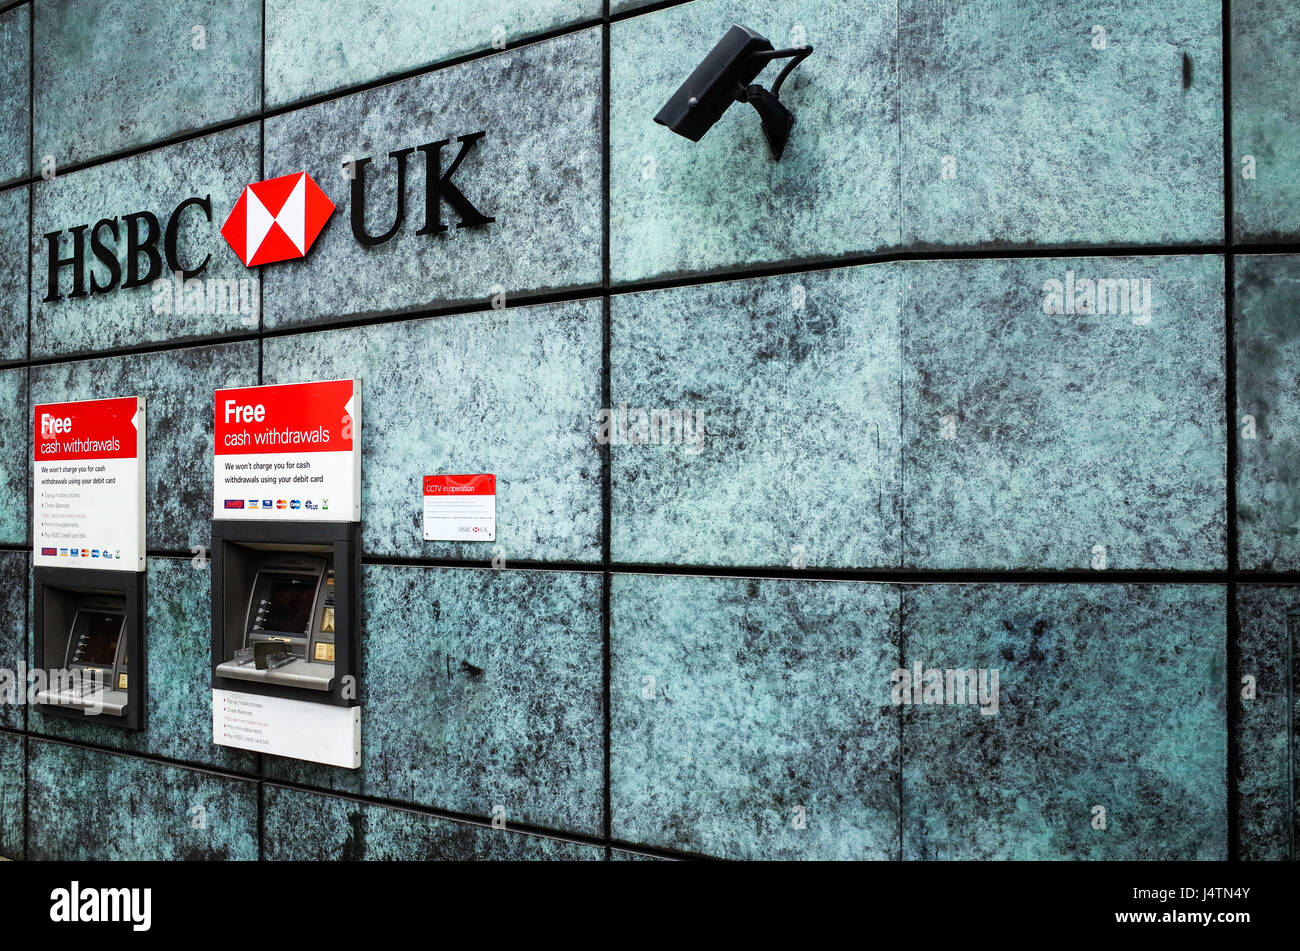 HSBC Bank cashpoints (cash machines or automated tellers) in the City of London financial district, UK. Stock Photo